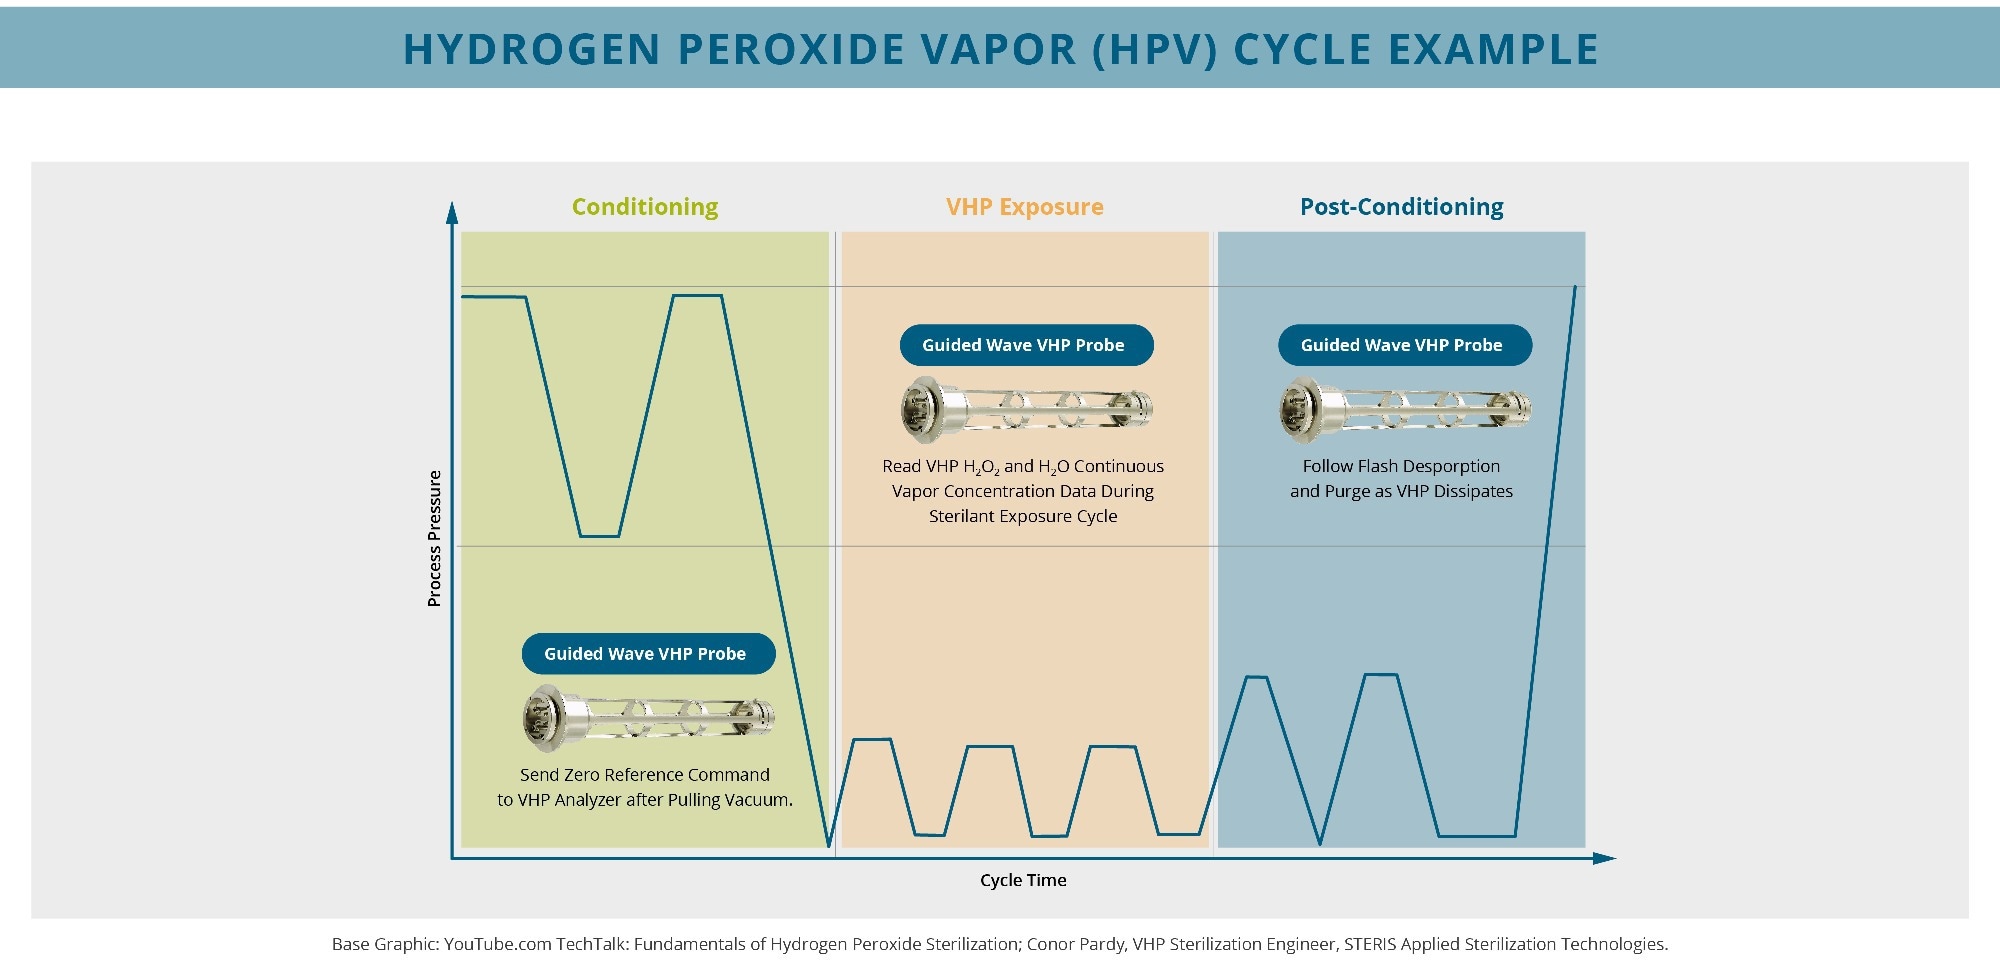 This chart illustrates a typical low-temperature, vacuum sterilization with sterilant pulse injection.  The Guided Wave HPV analyzer provides high-fidelity monitoring of both H2O2 and H2O vapor concentrations during pressure changes.